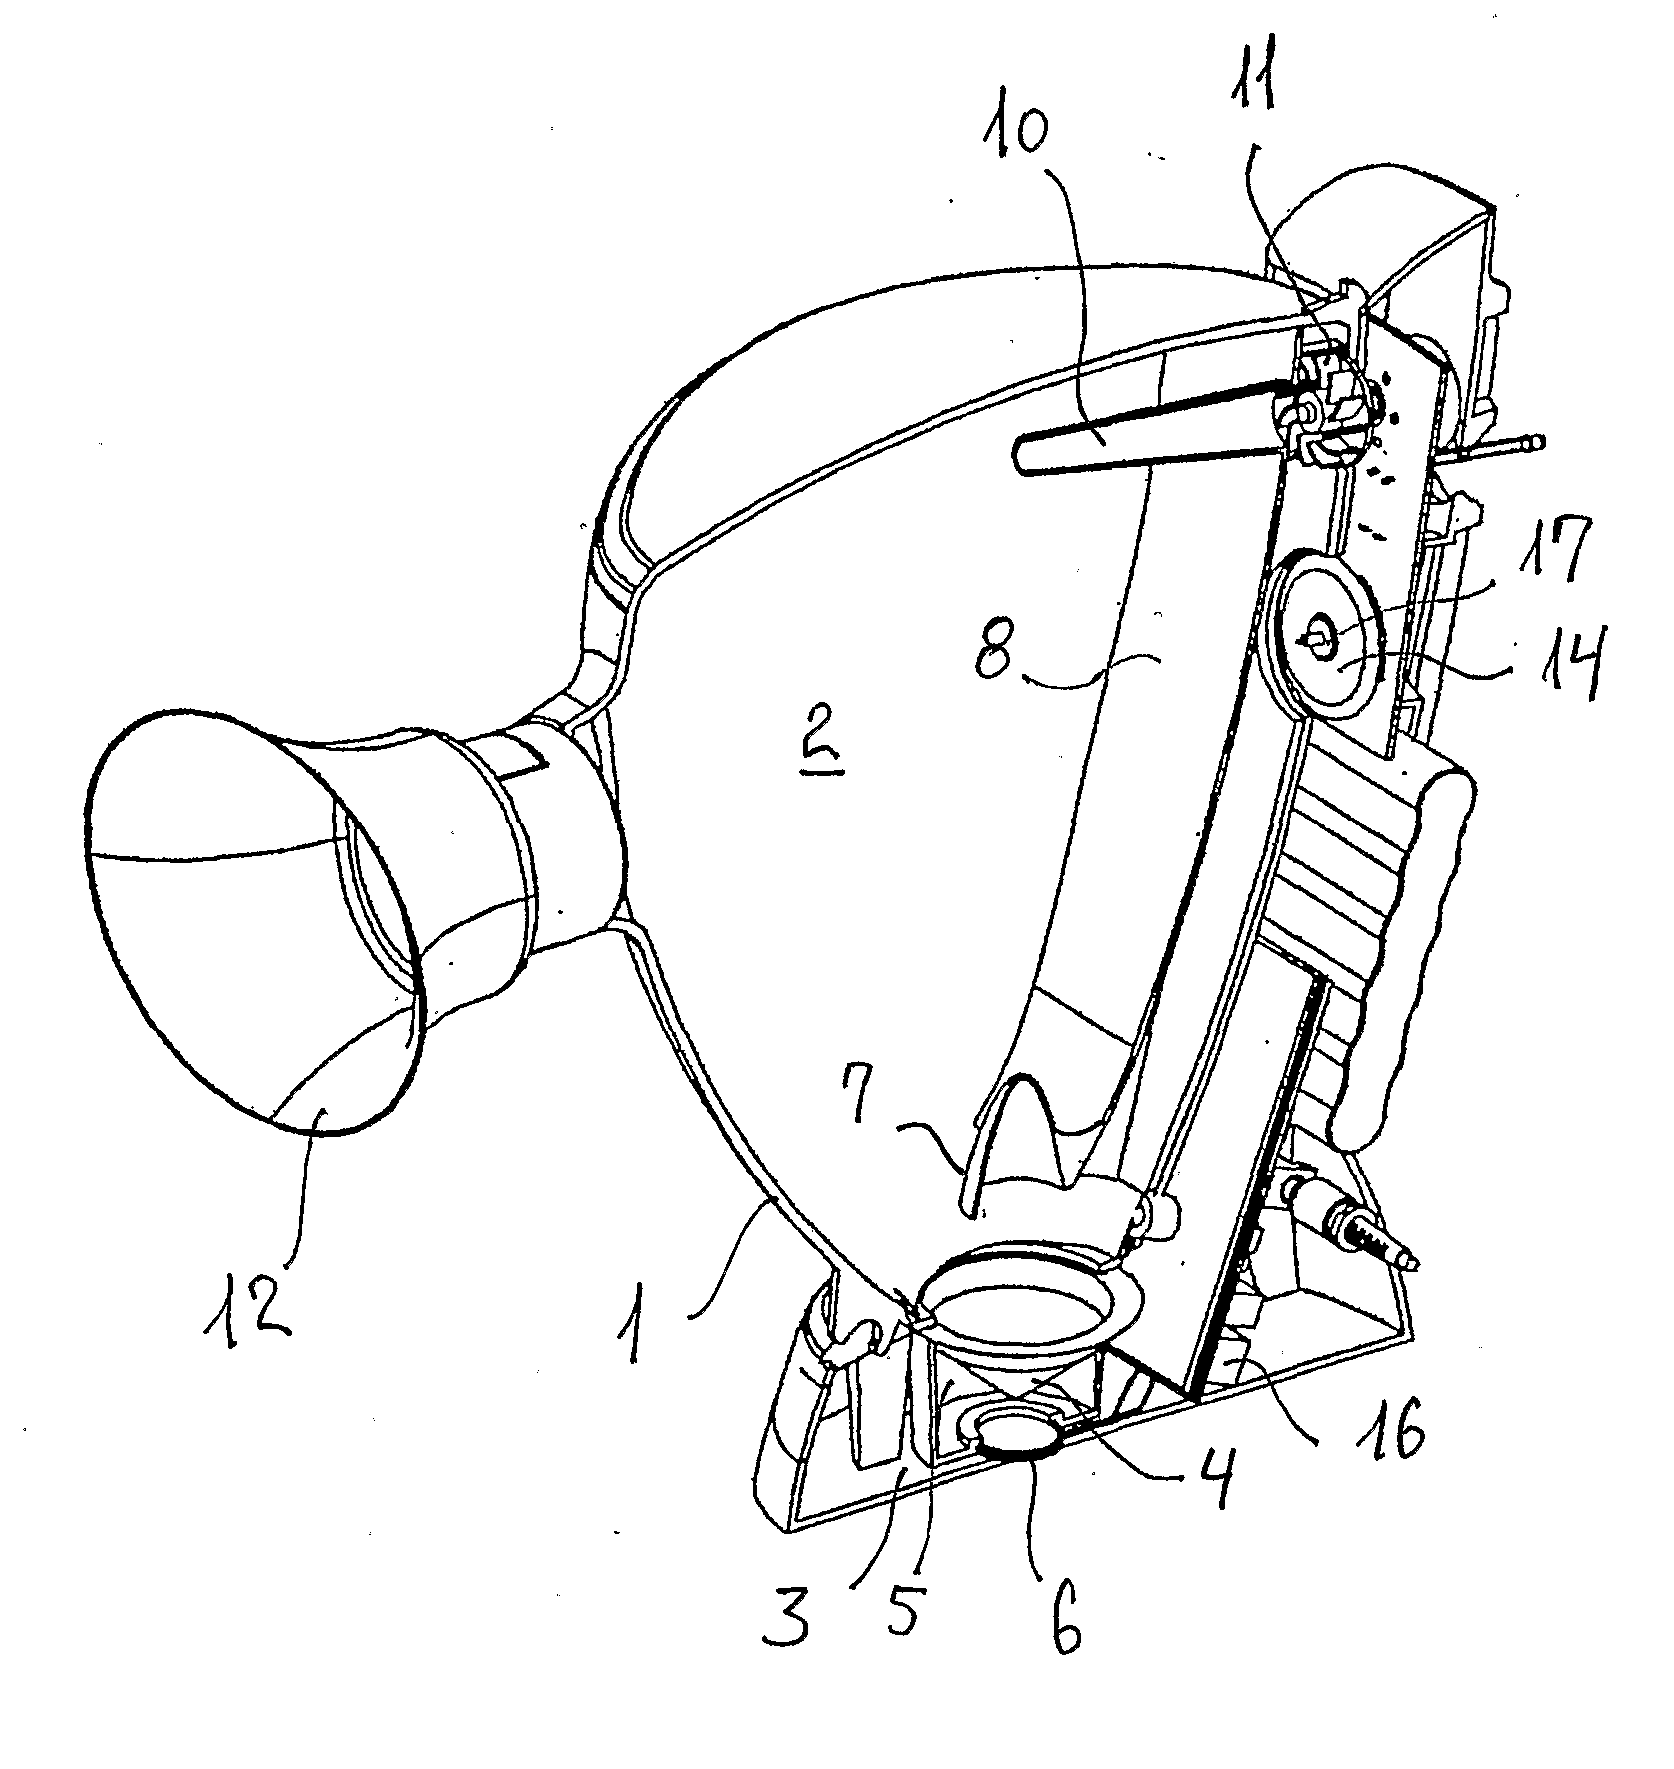 Inhalation device for providing a mist of nebulised liquid medical solution to a user